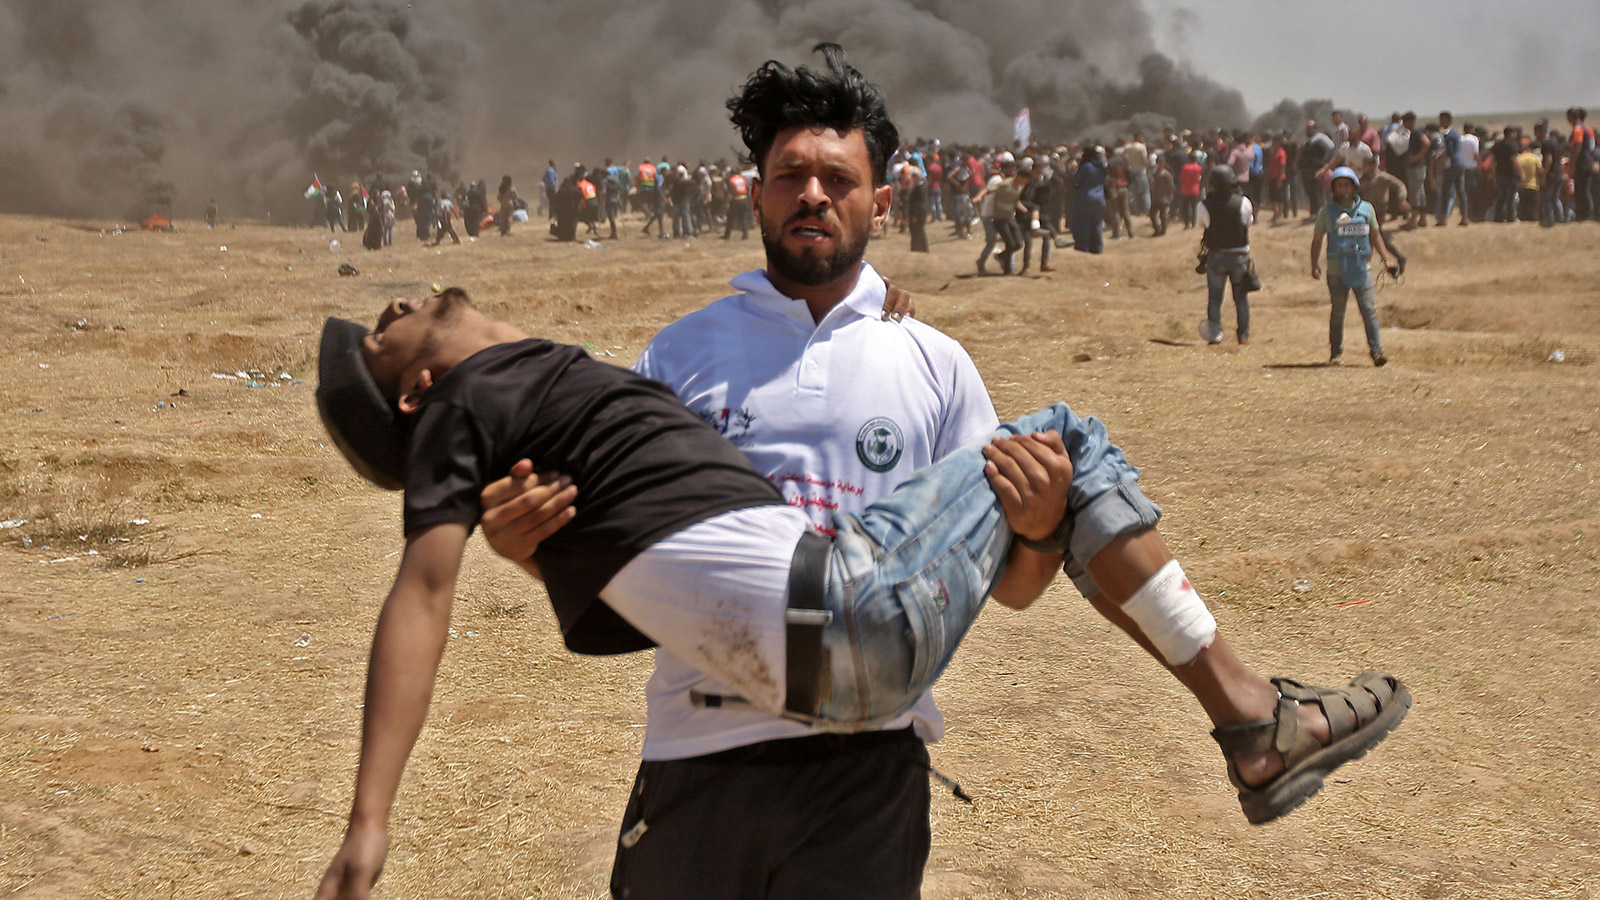 In pictures: Deadliest day in Gaza since 2014